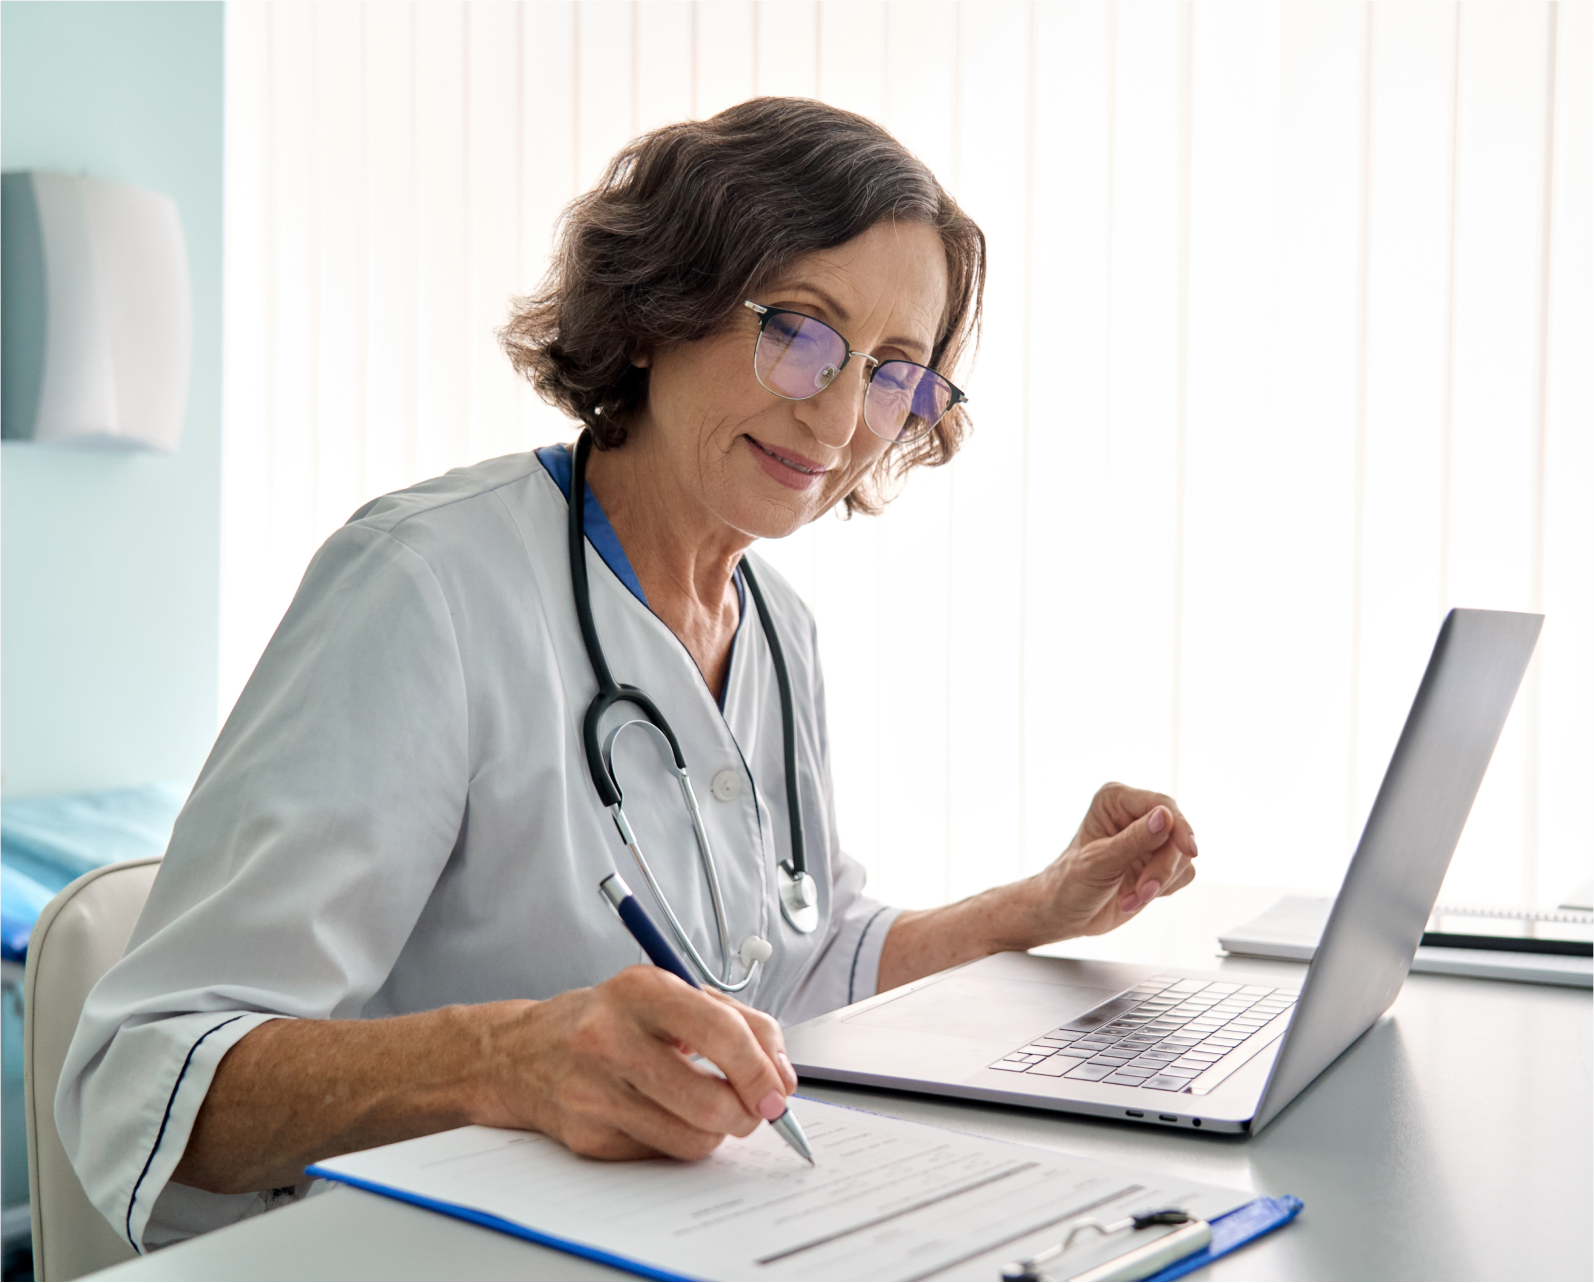 Woman doctor reviewing patient notes on a laptop writing on a clipboard